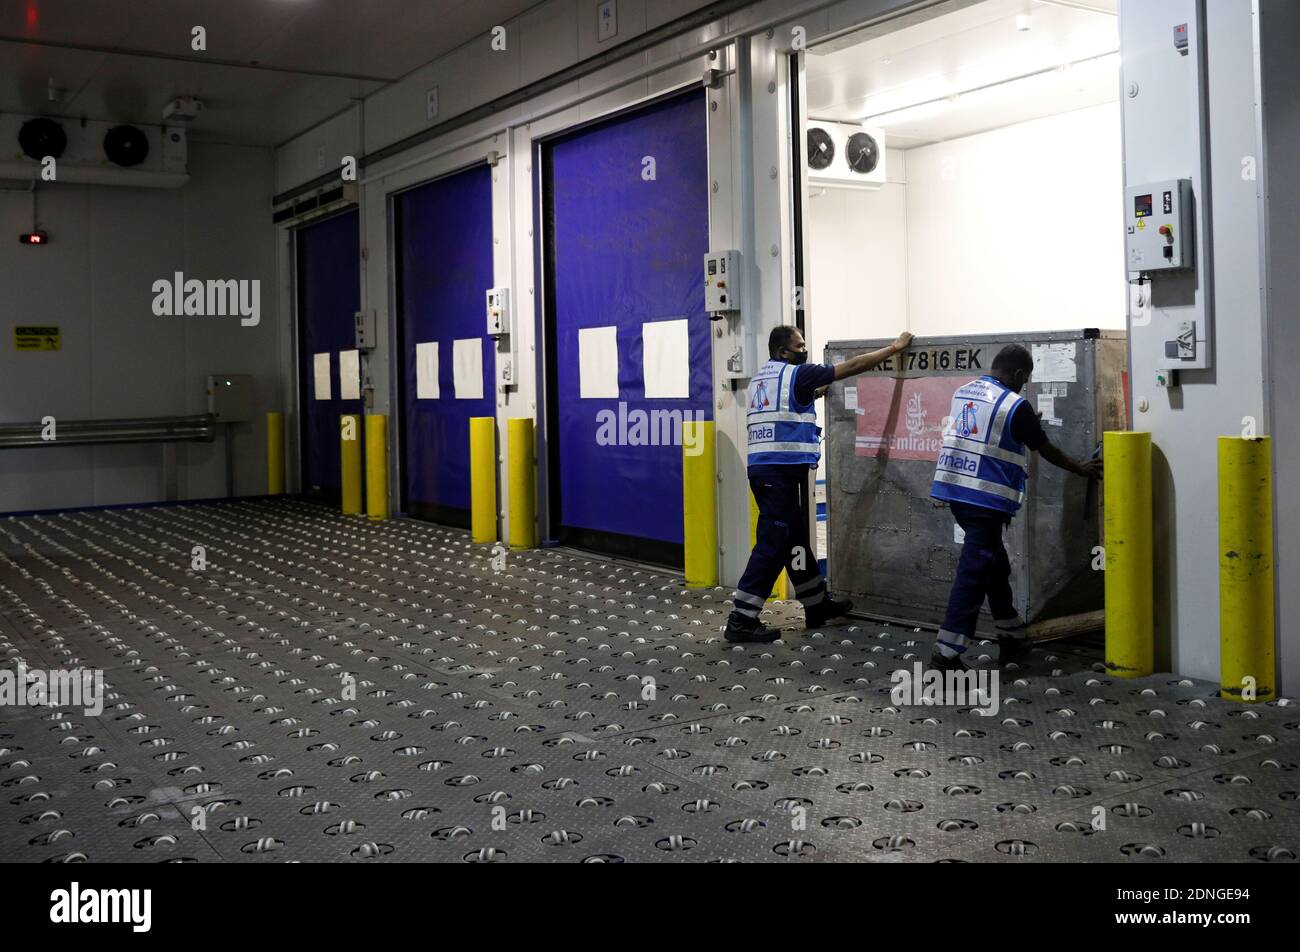 Ground handlers push a cargo box into a cold storage room at dnata's cool chain facility in Singapore December 17, 2020. Picture taken December 17, 2020. REUTERS/Edgar Su Stock Photo